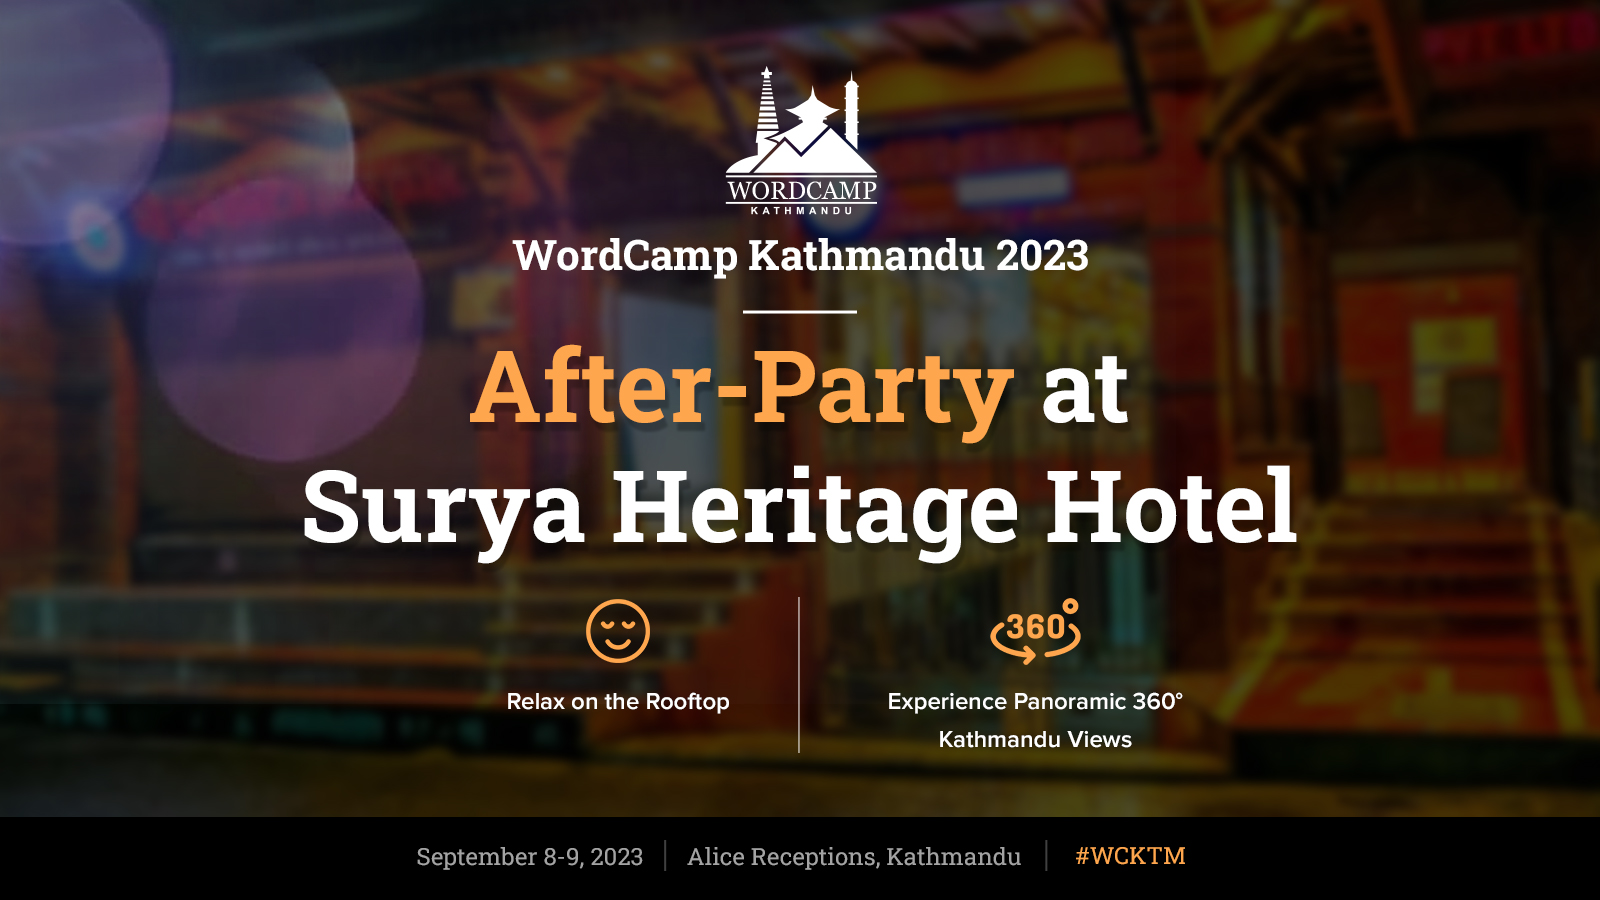 After-Party at Surya Heritage Hotel